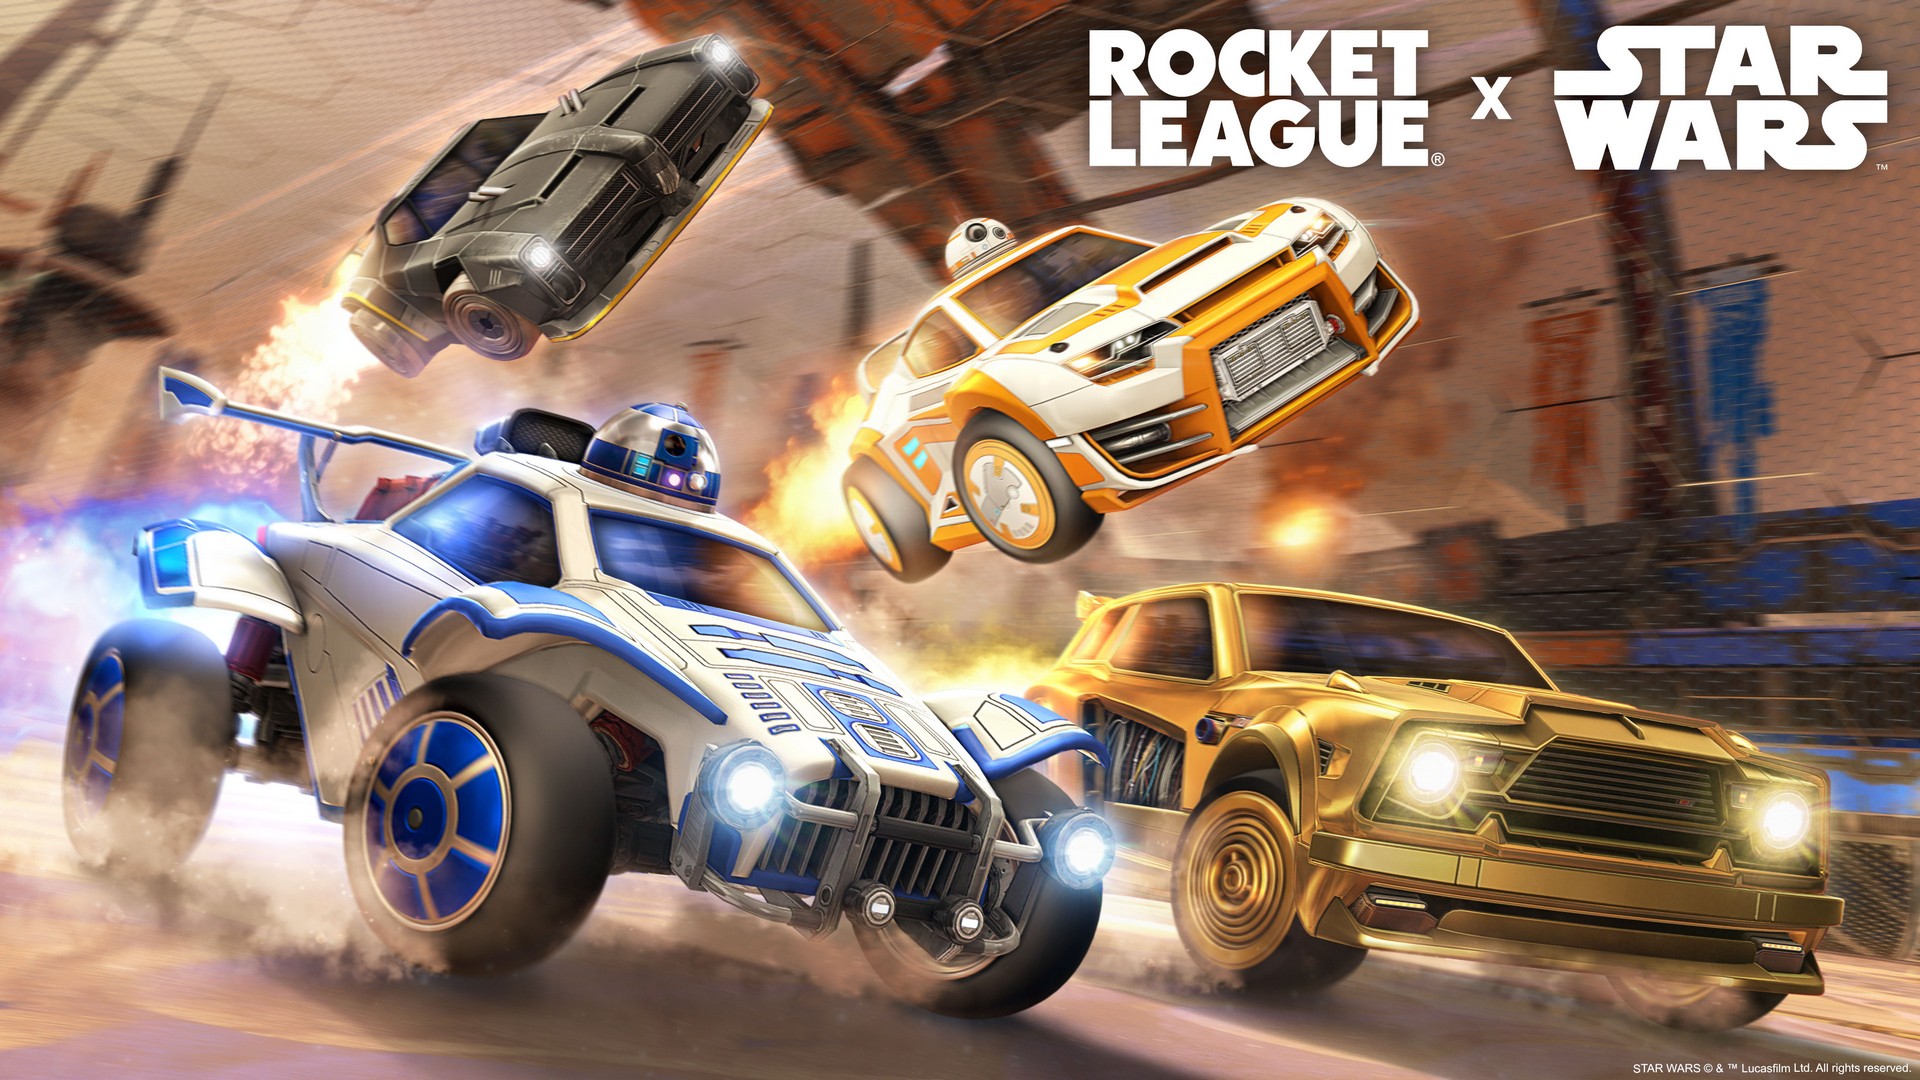 Star Wars Droid Content Arrives In Rocket League On May 5th